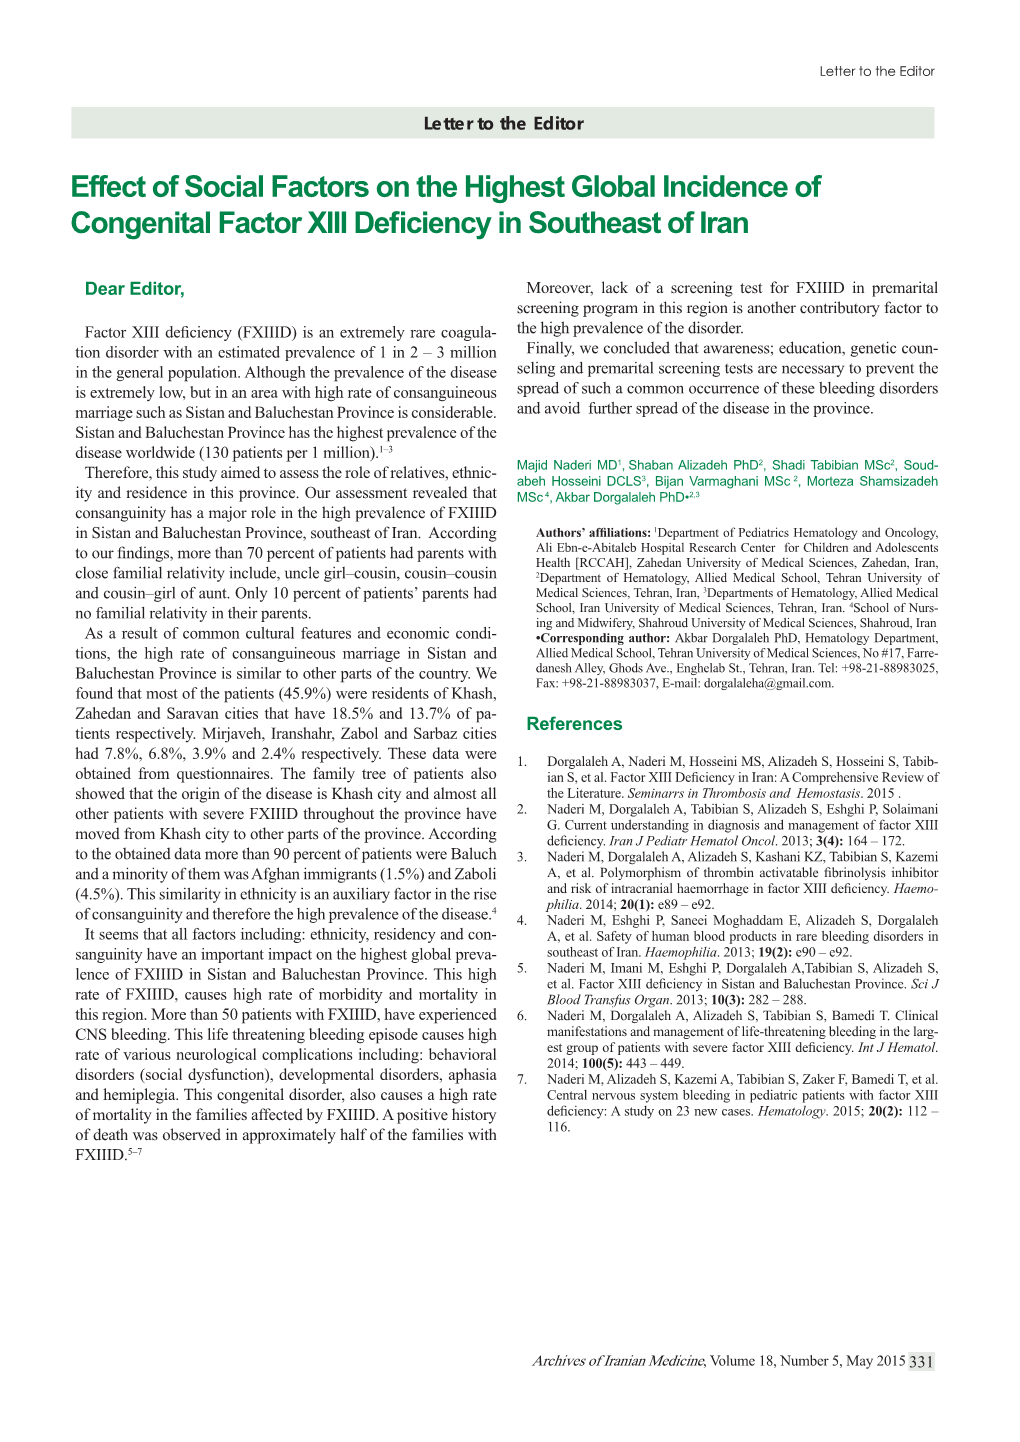 Effect of Social Factors on the Highest Global Incidence of Congenital